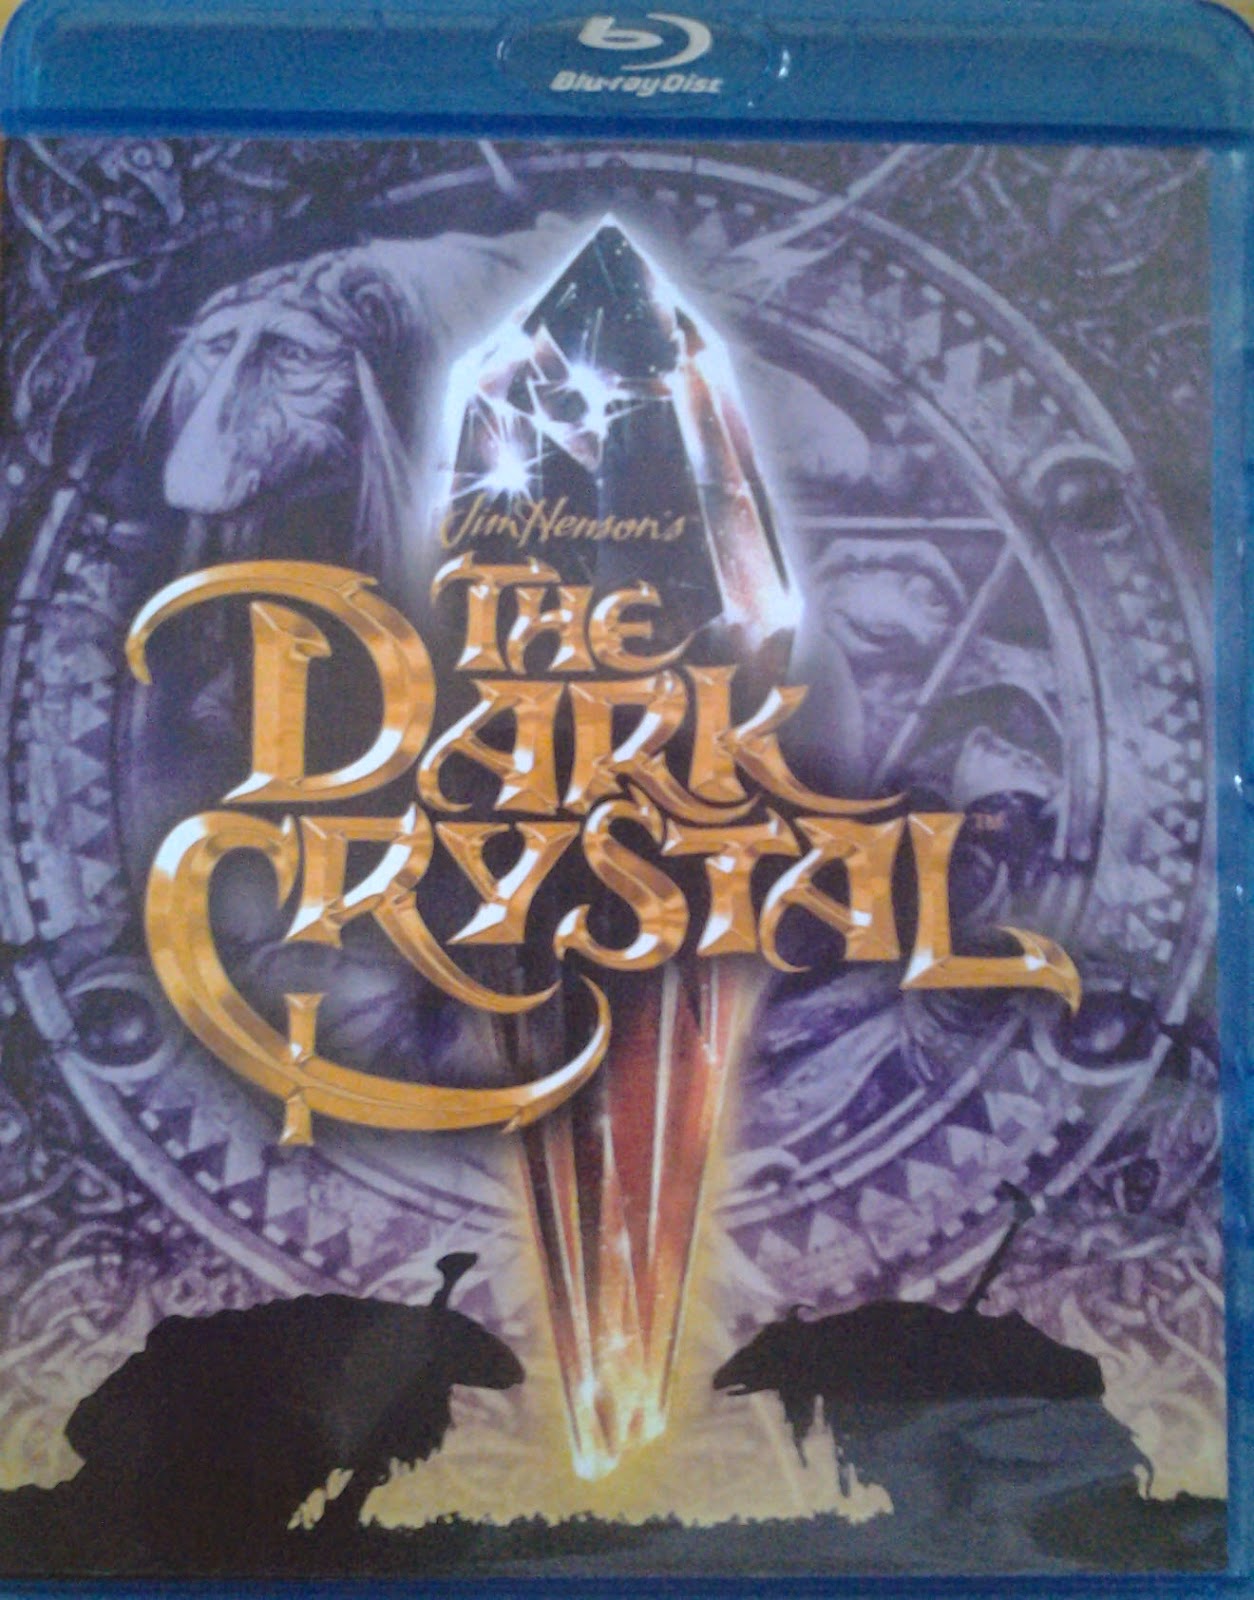 DVD Cover - The Dark Crystal